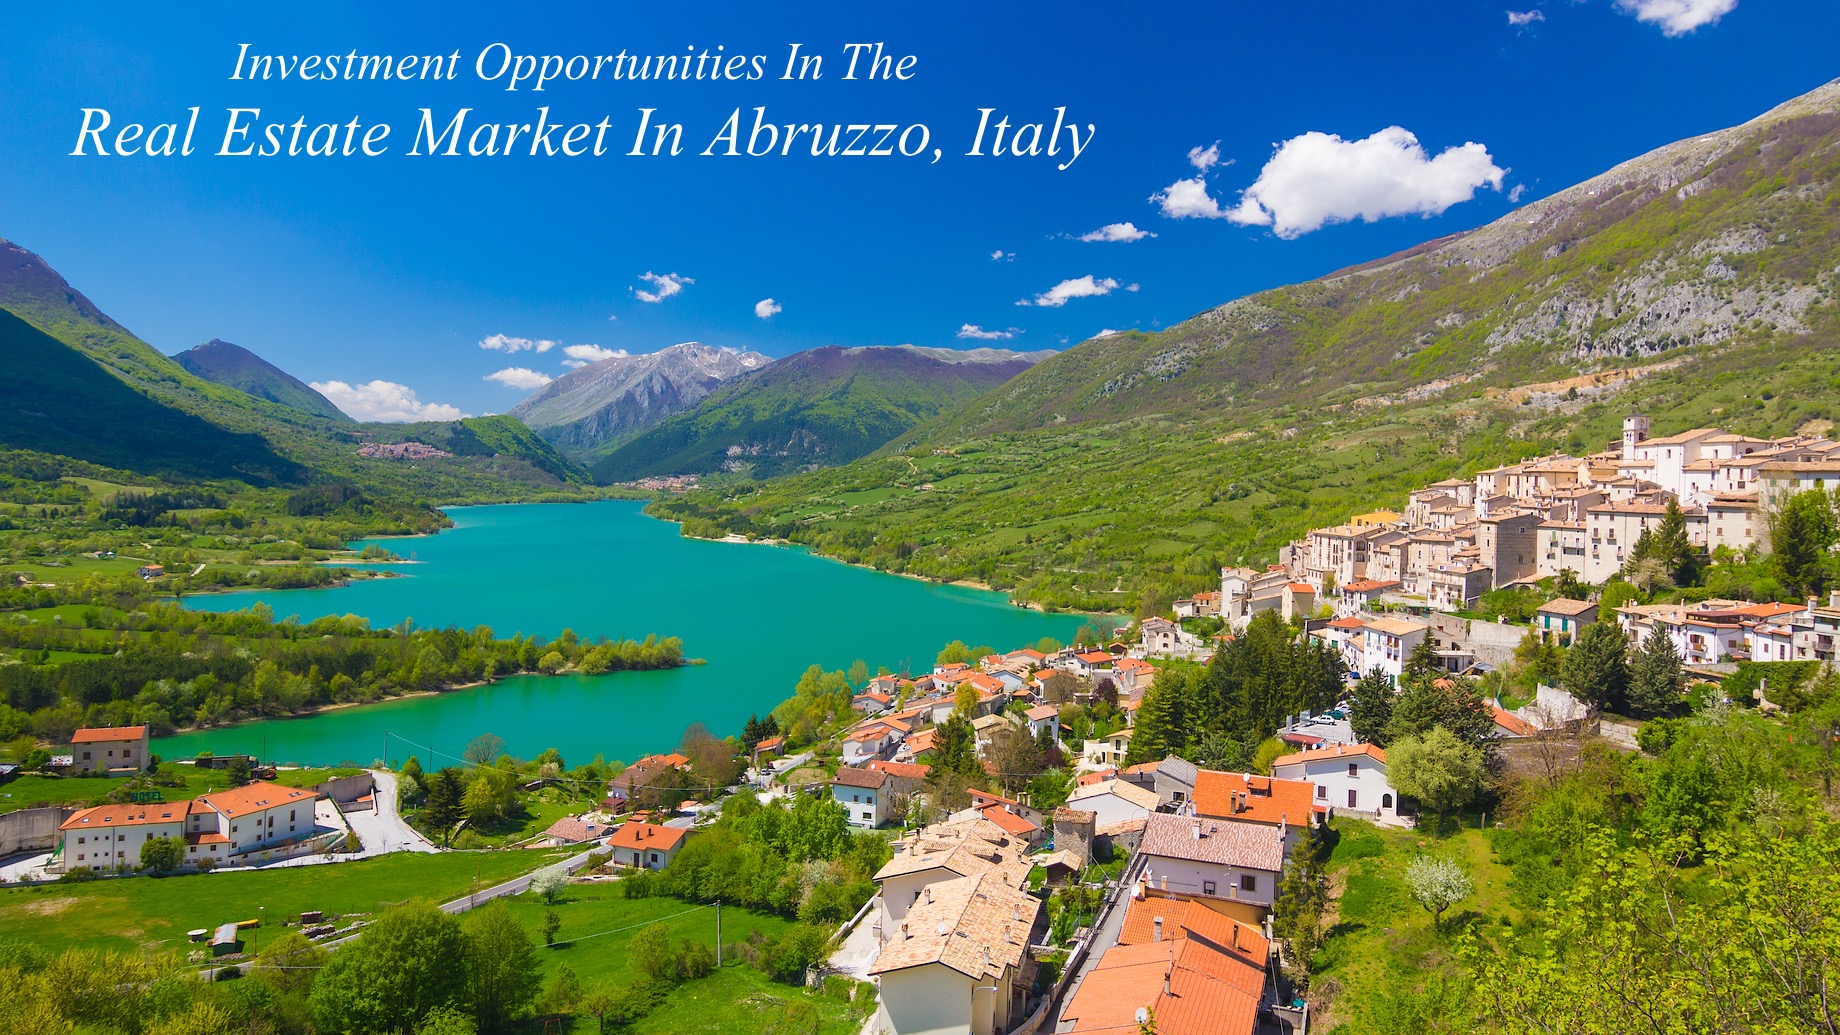 Investment Opportunities In The Real Estate Market In Abruzzo, Italy